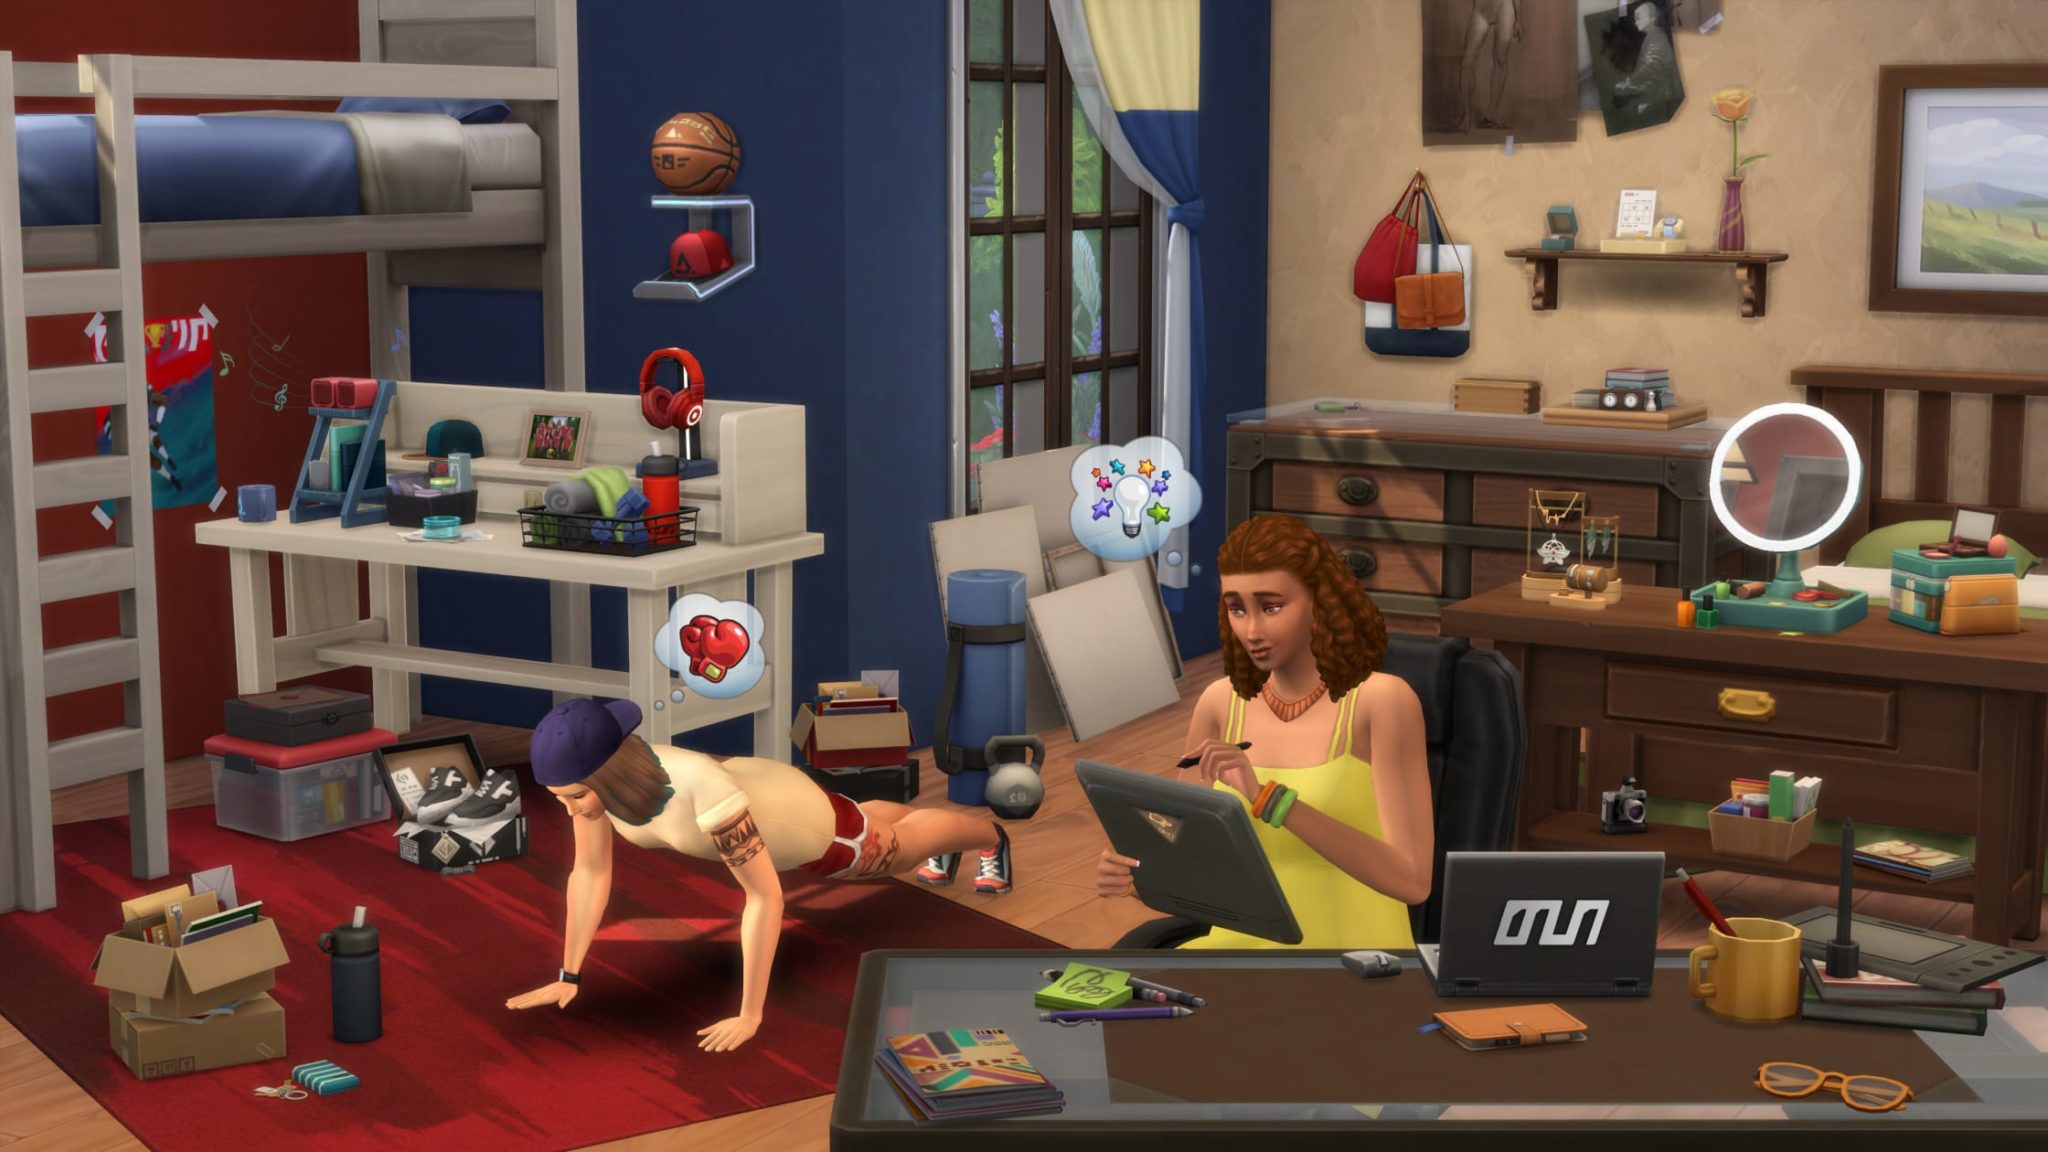 The Sims 4 Free Anniversary All in One Portable 1.61.15.1020 - The Sim Architect